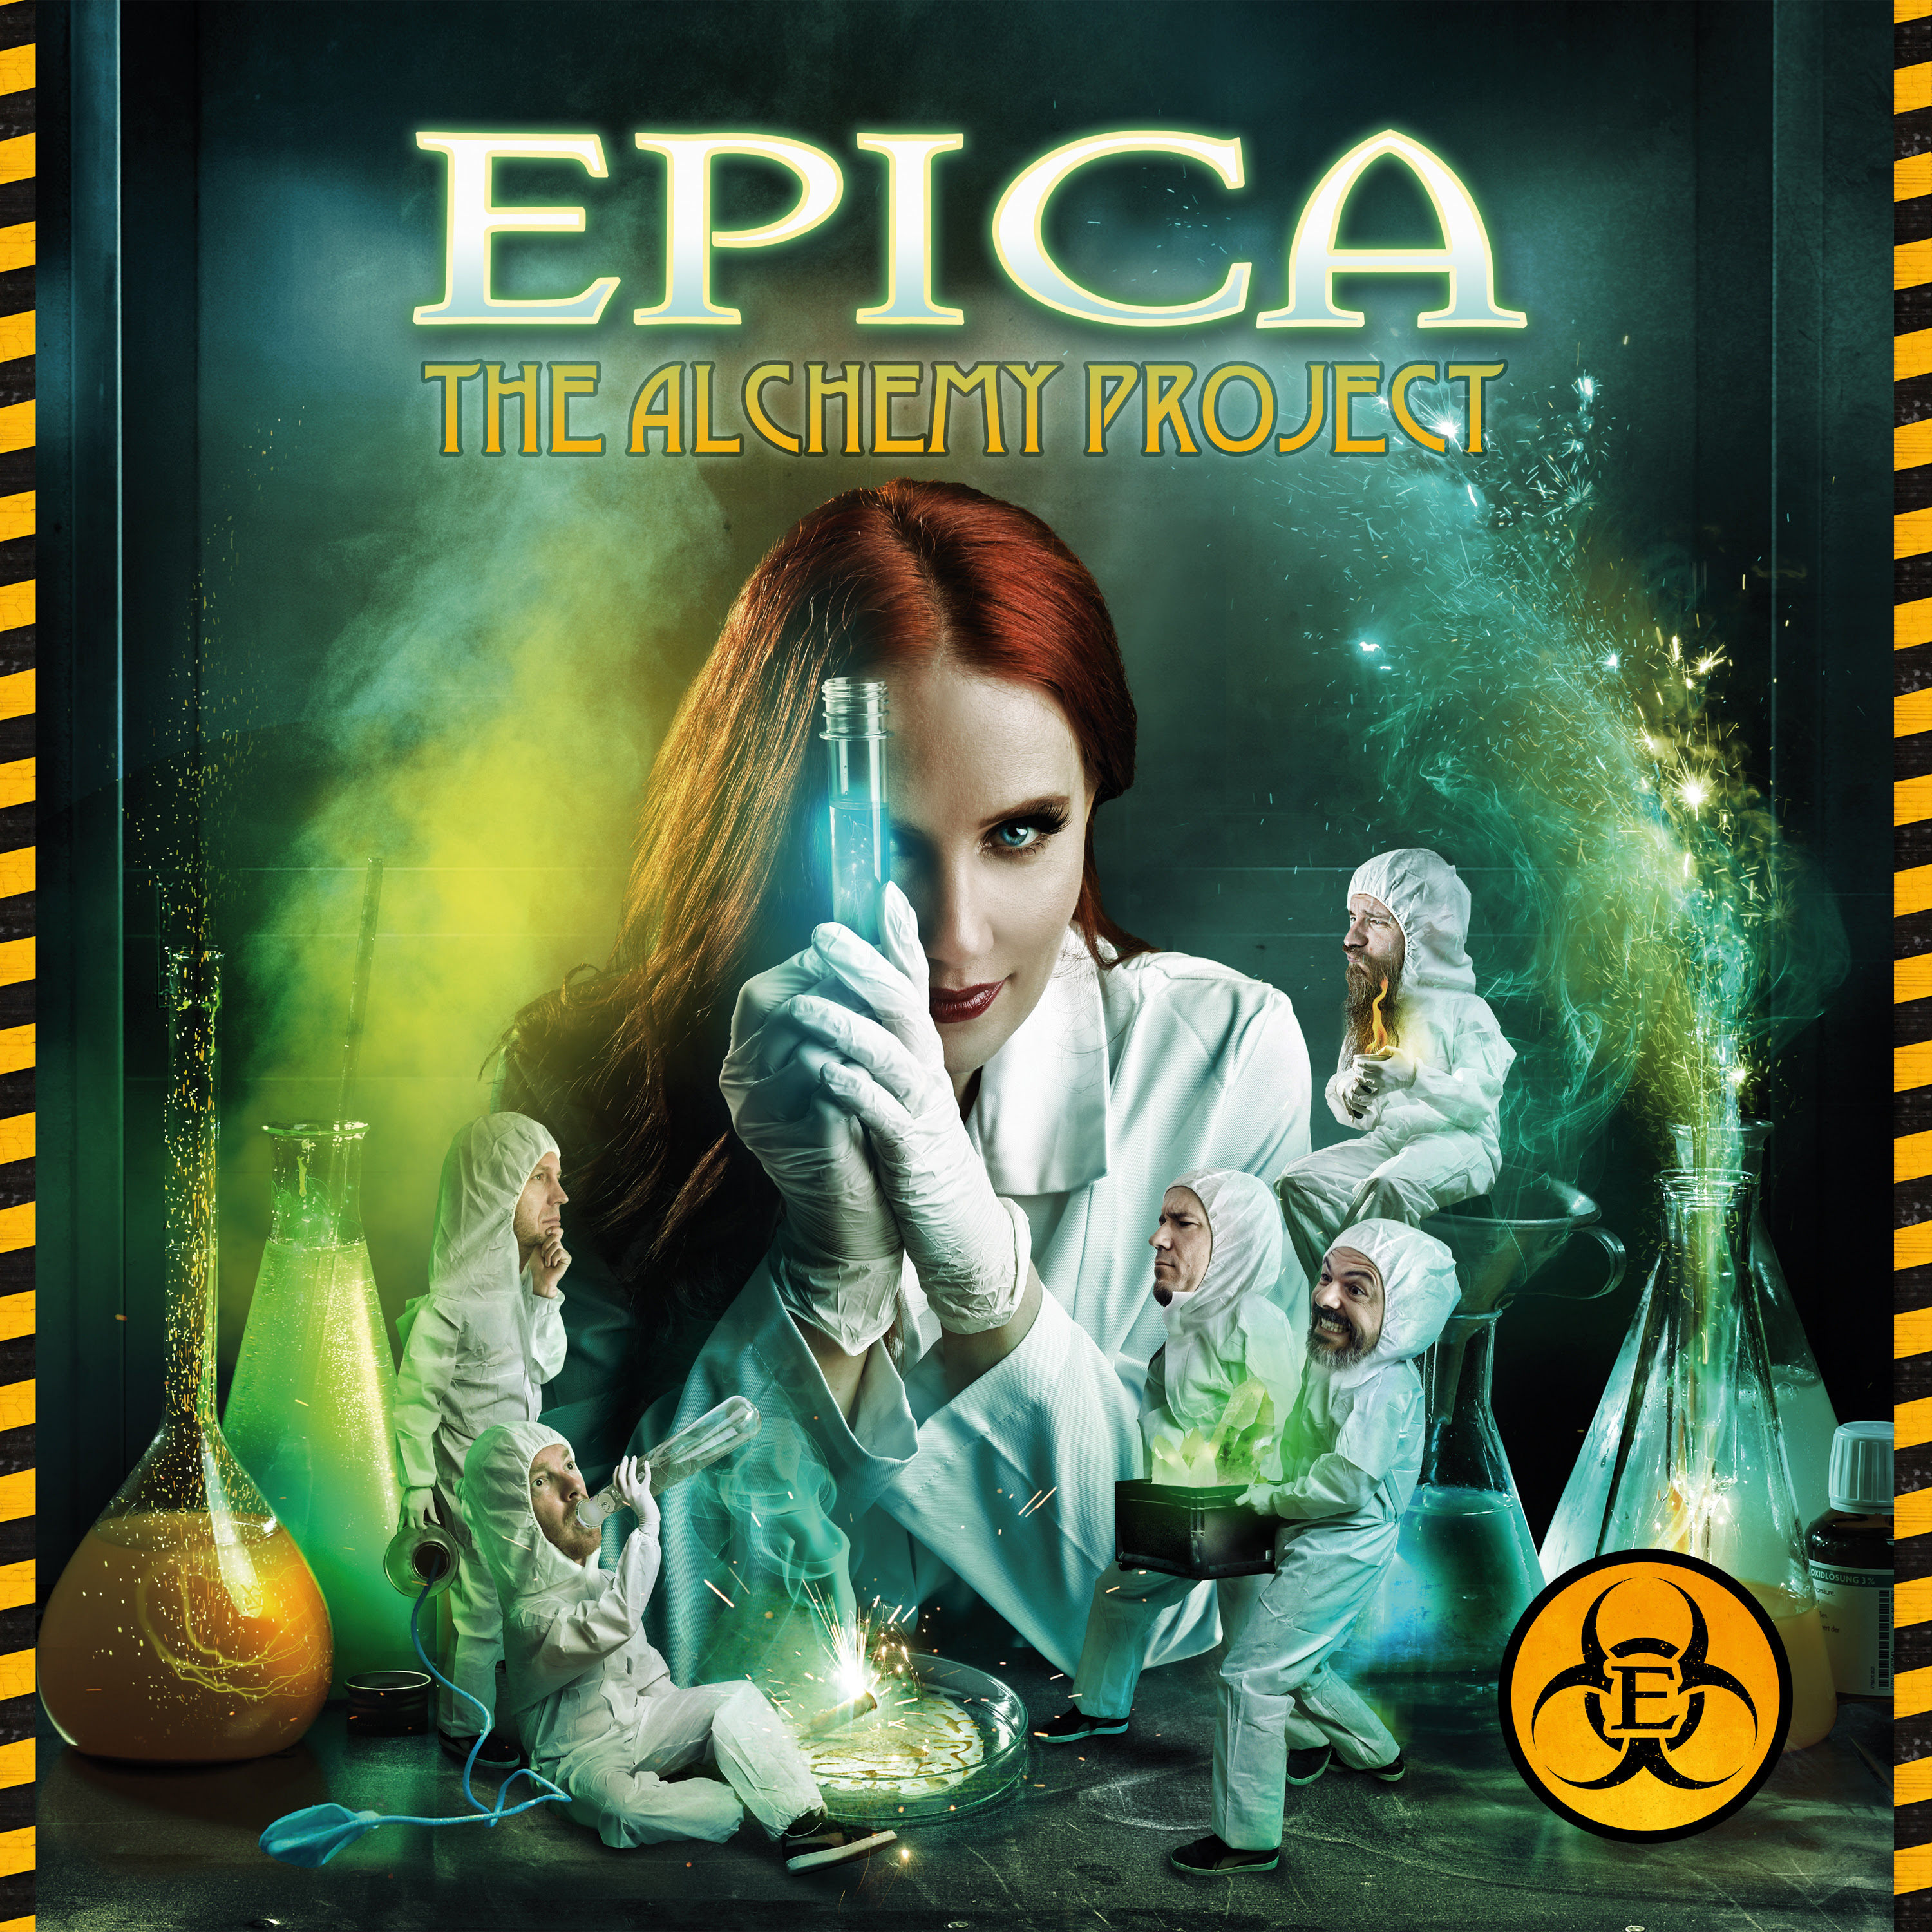 epica alchemy project